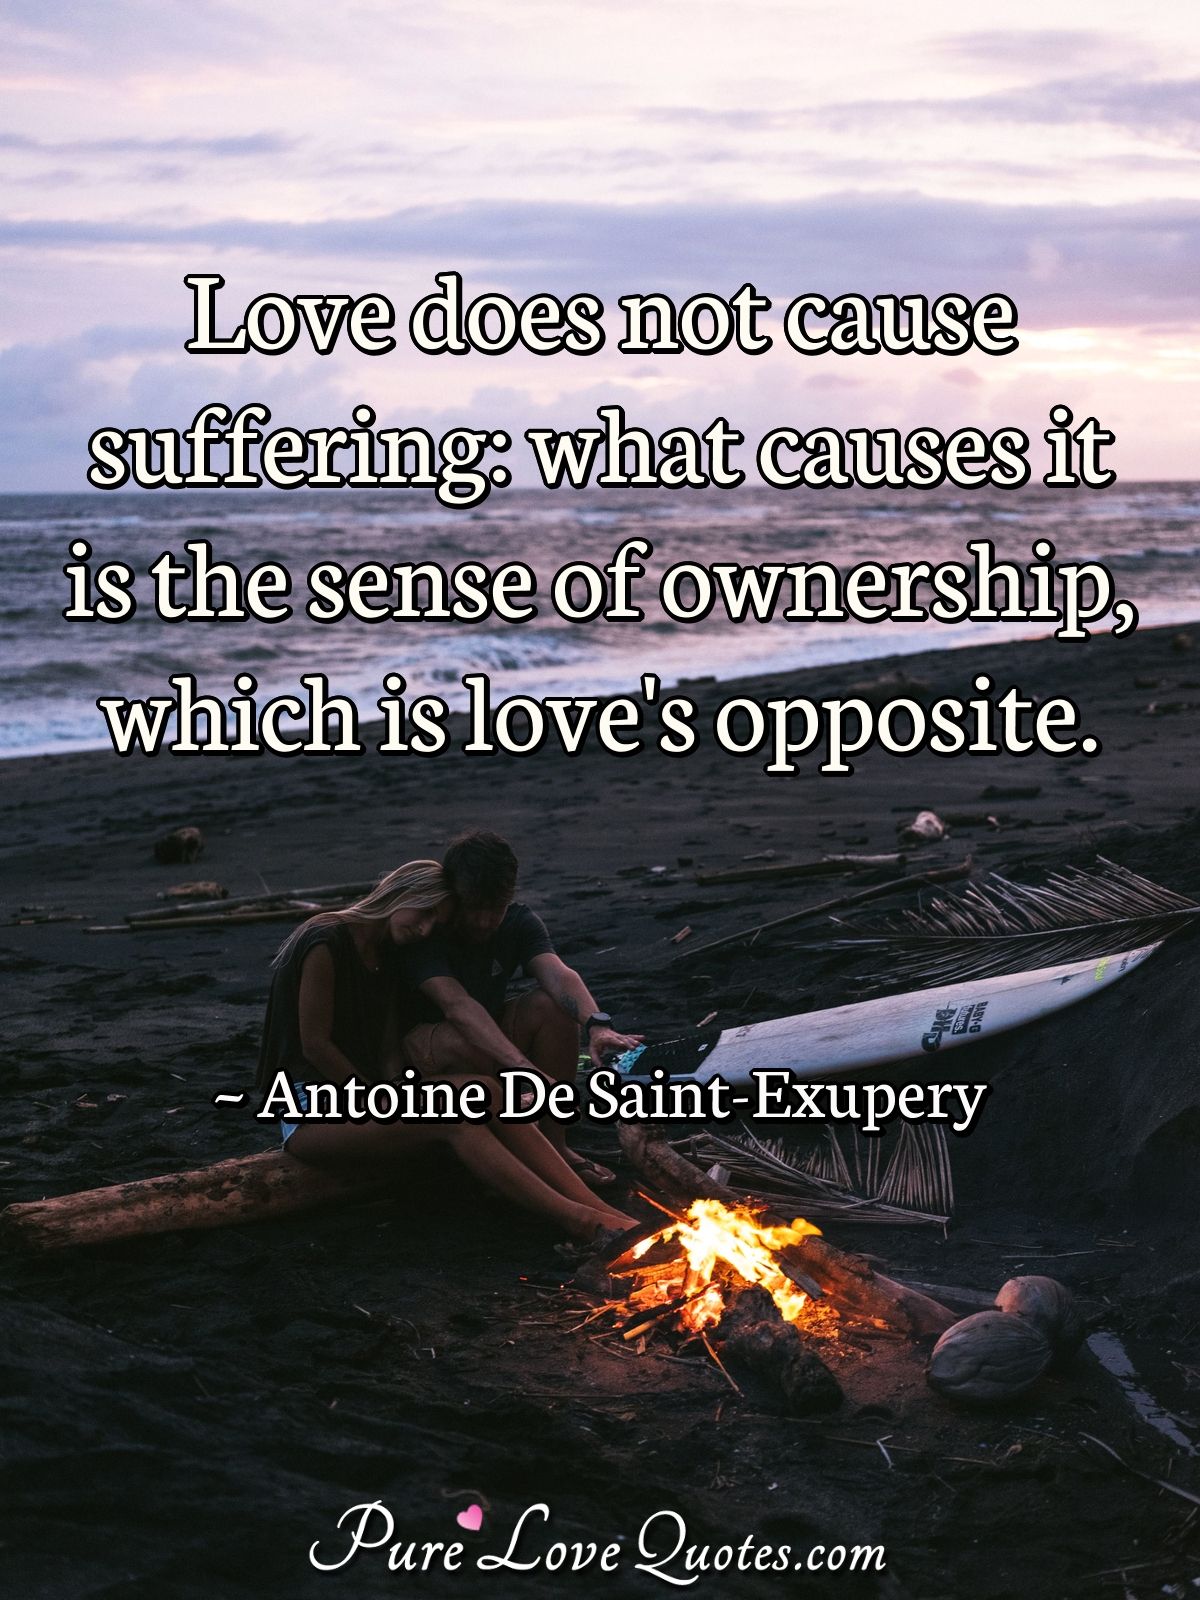 Love does not cause suffering: what causes it is the sense of ownership, which is love's opposite. - Antoine De Saint-Exupery